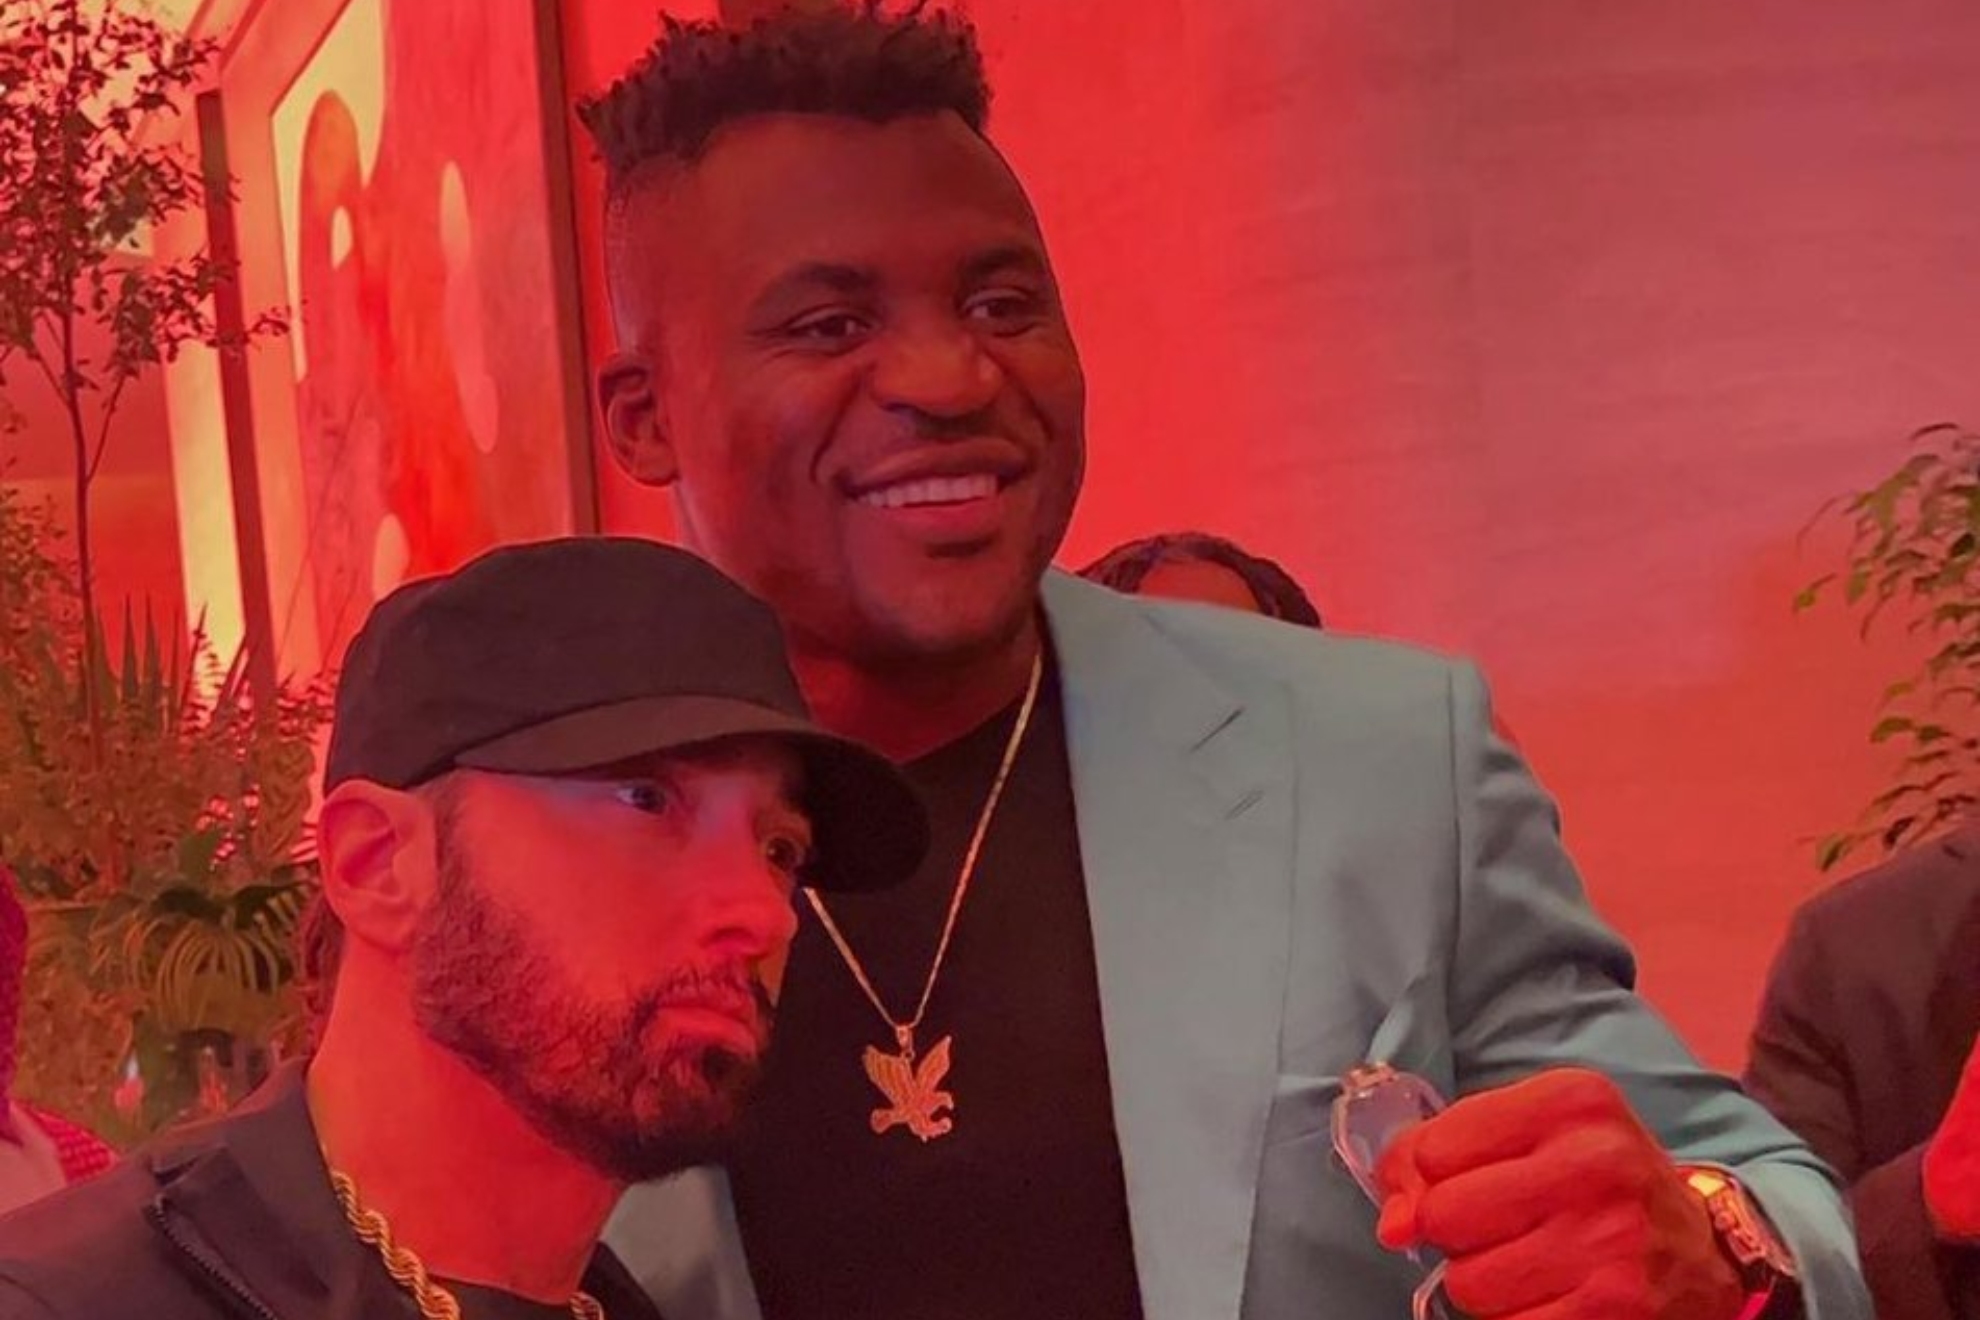 Eminem poses for a picture with Francis Ngannou